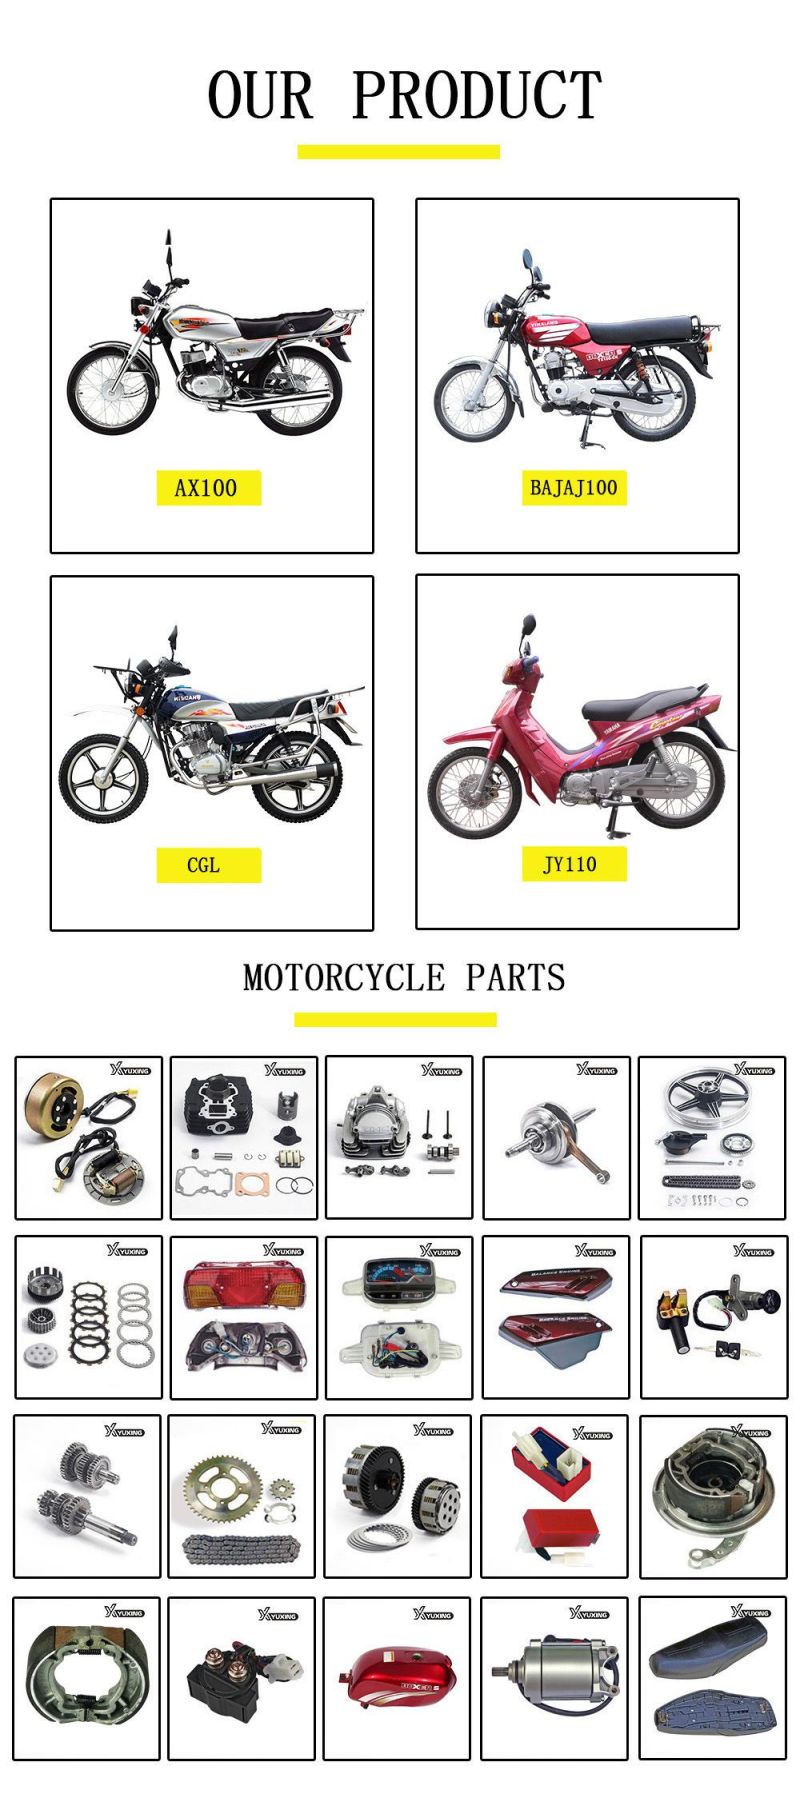 Motorcycle Engine Spare Parts Mf12V7-1A Maintenance-Free Motorcycle Battery for Motorbike